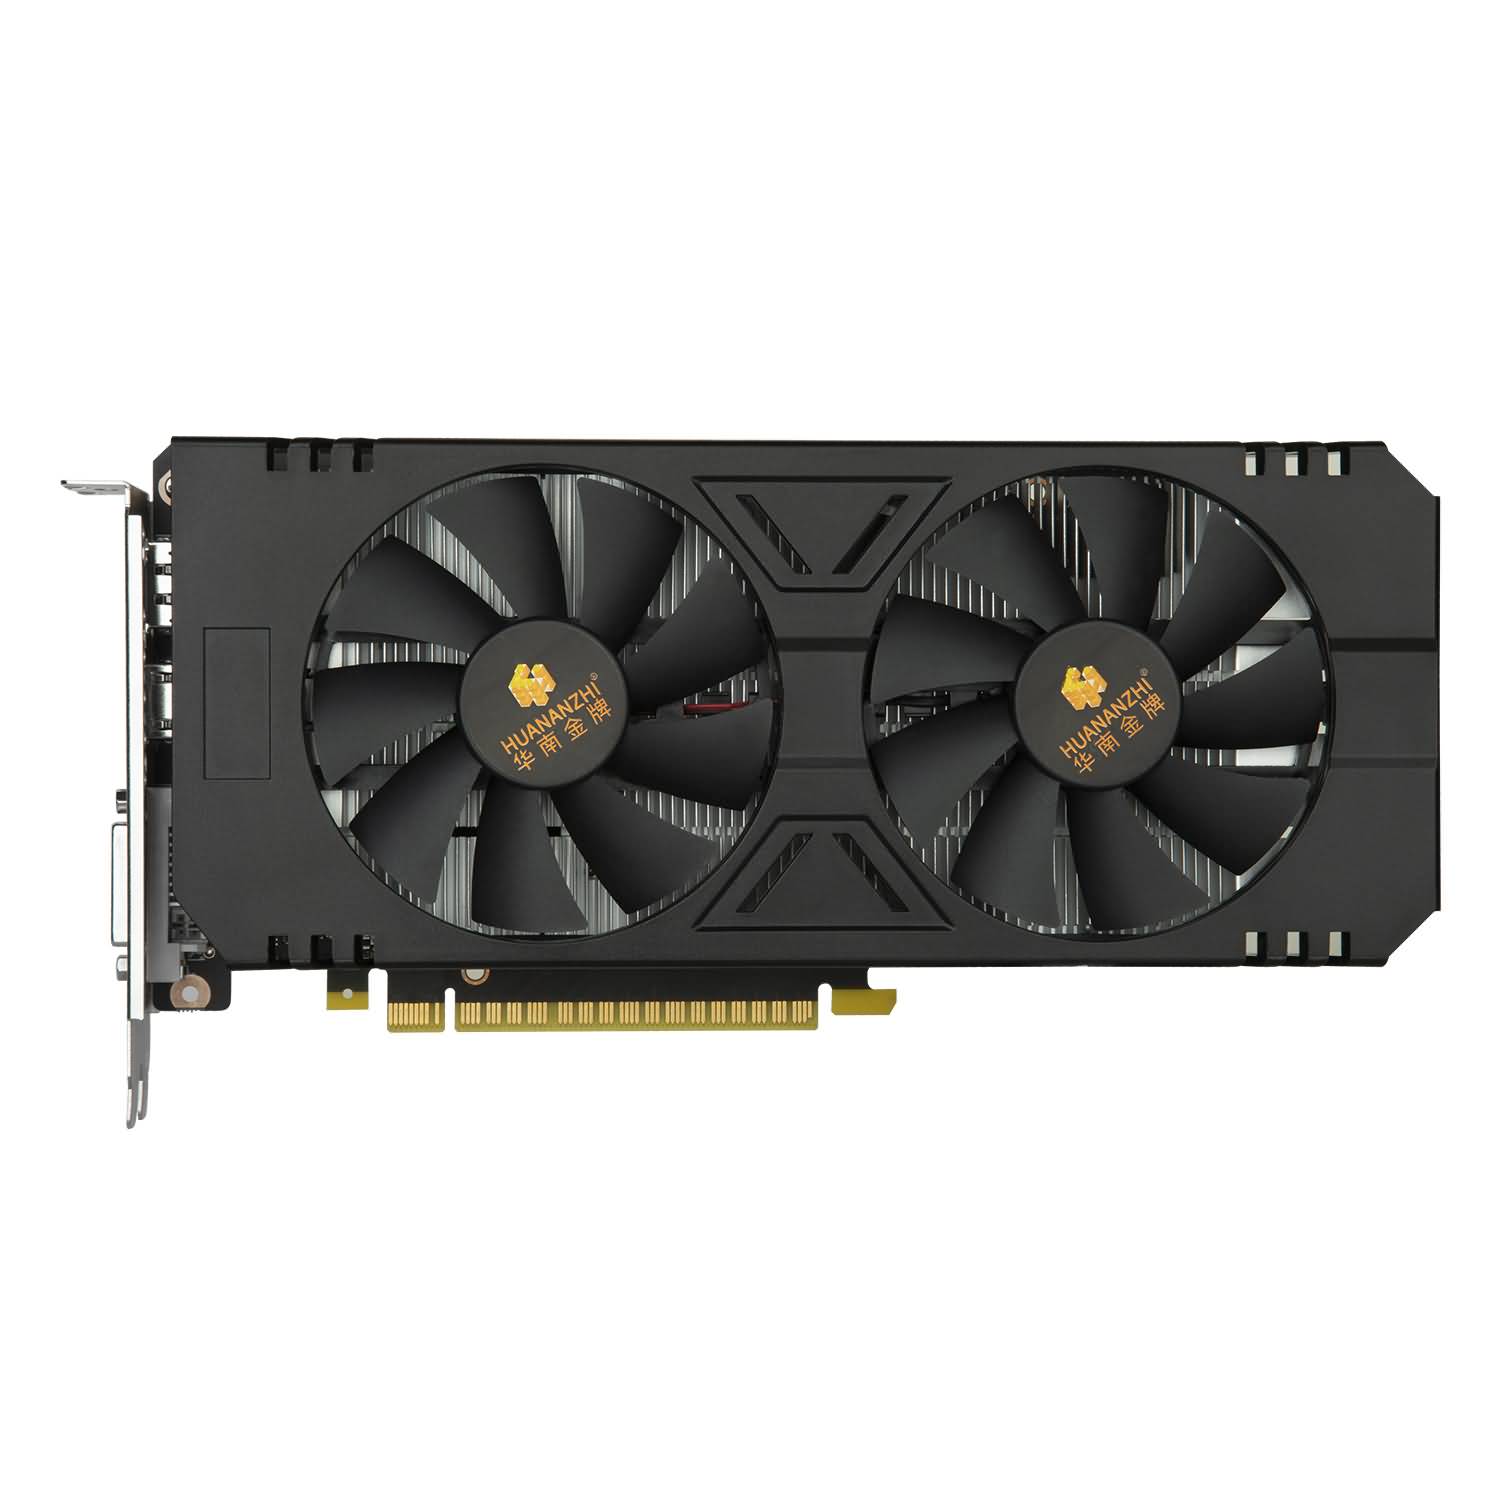 Download Huananzhi RTX2060 6G Graphics Card Free